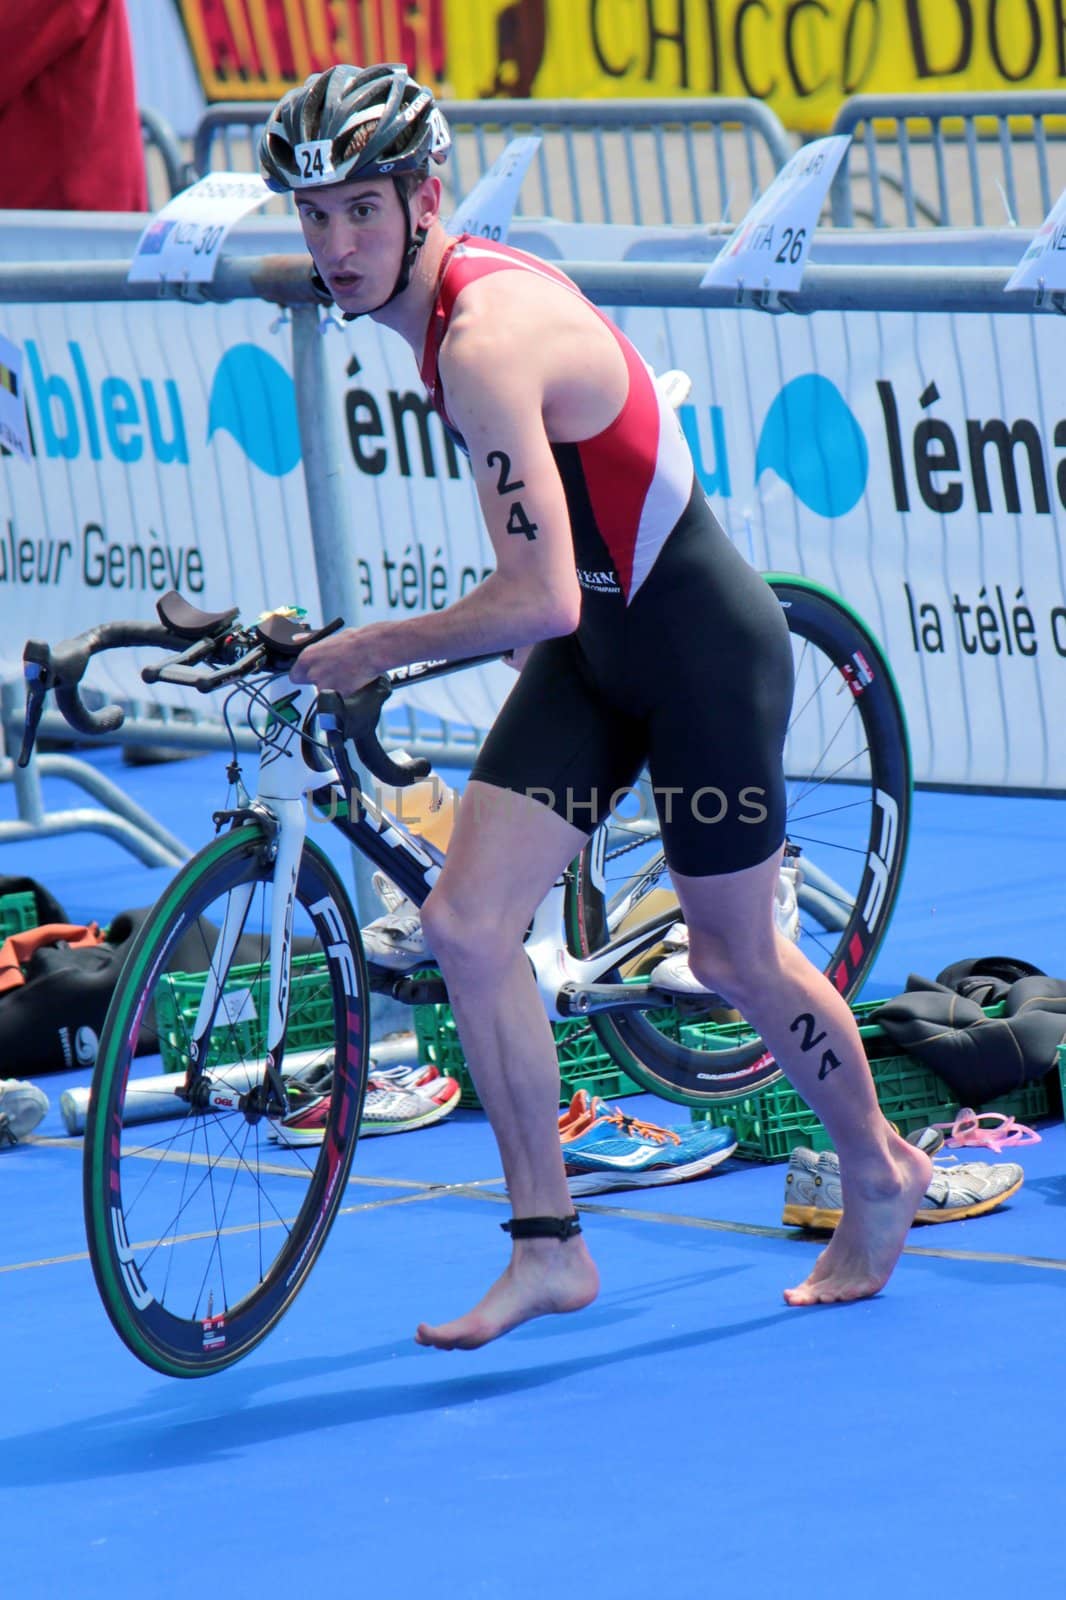 GENEVA, SWITZERLAND - JULY 22 : unidentified athlet holding his bike at transition space at the International Geneva Triathlon, on July 22, 2012 in Geneva, Switzerland.